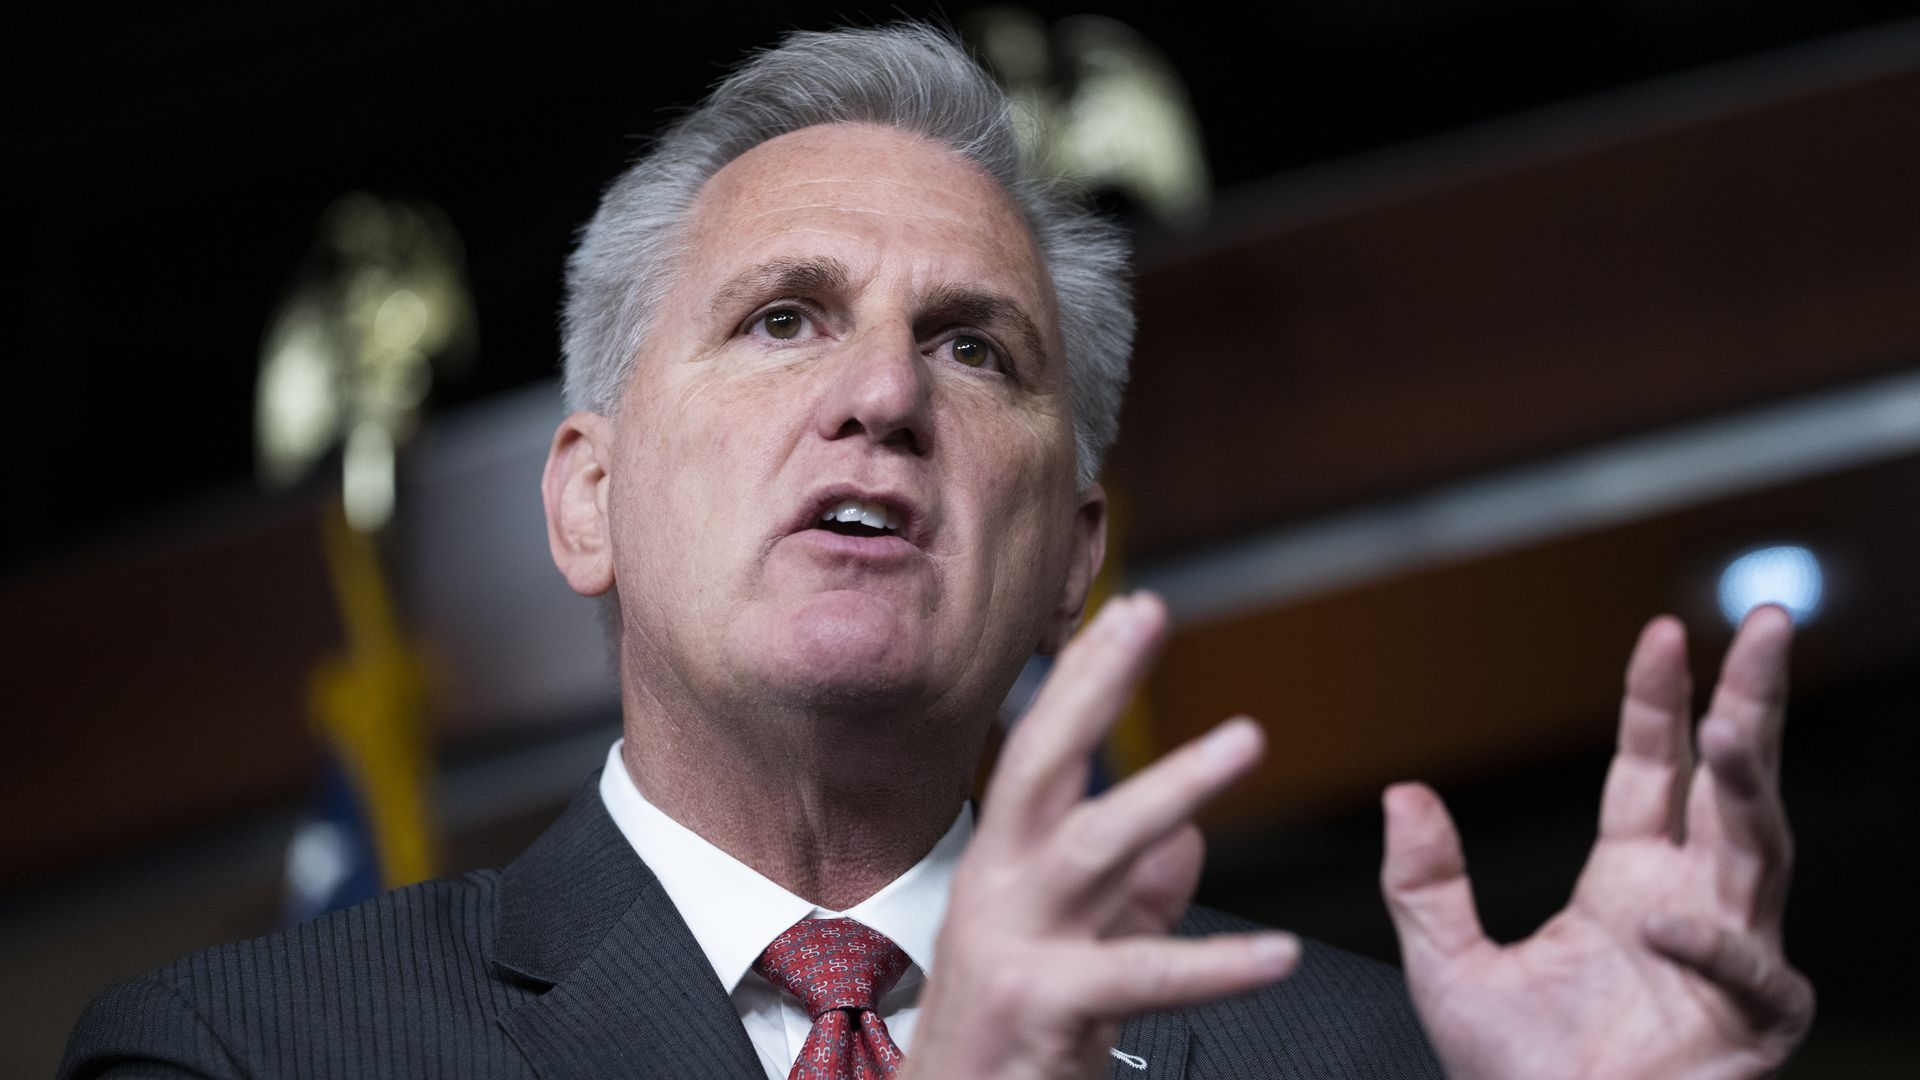 House Majority Leader Kevin McCarthy is seen addressing a news conference.